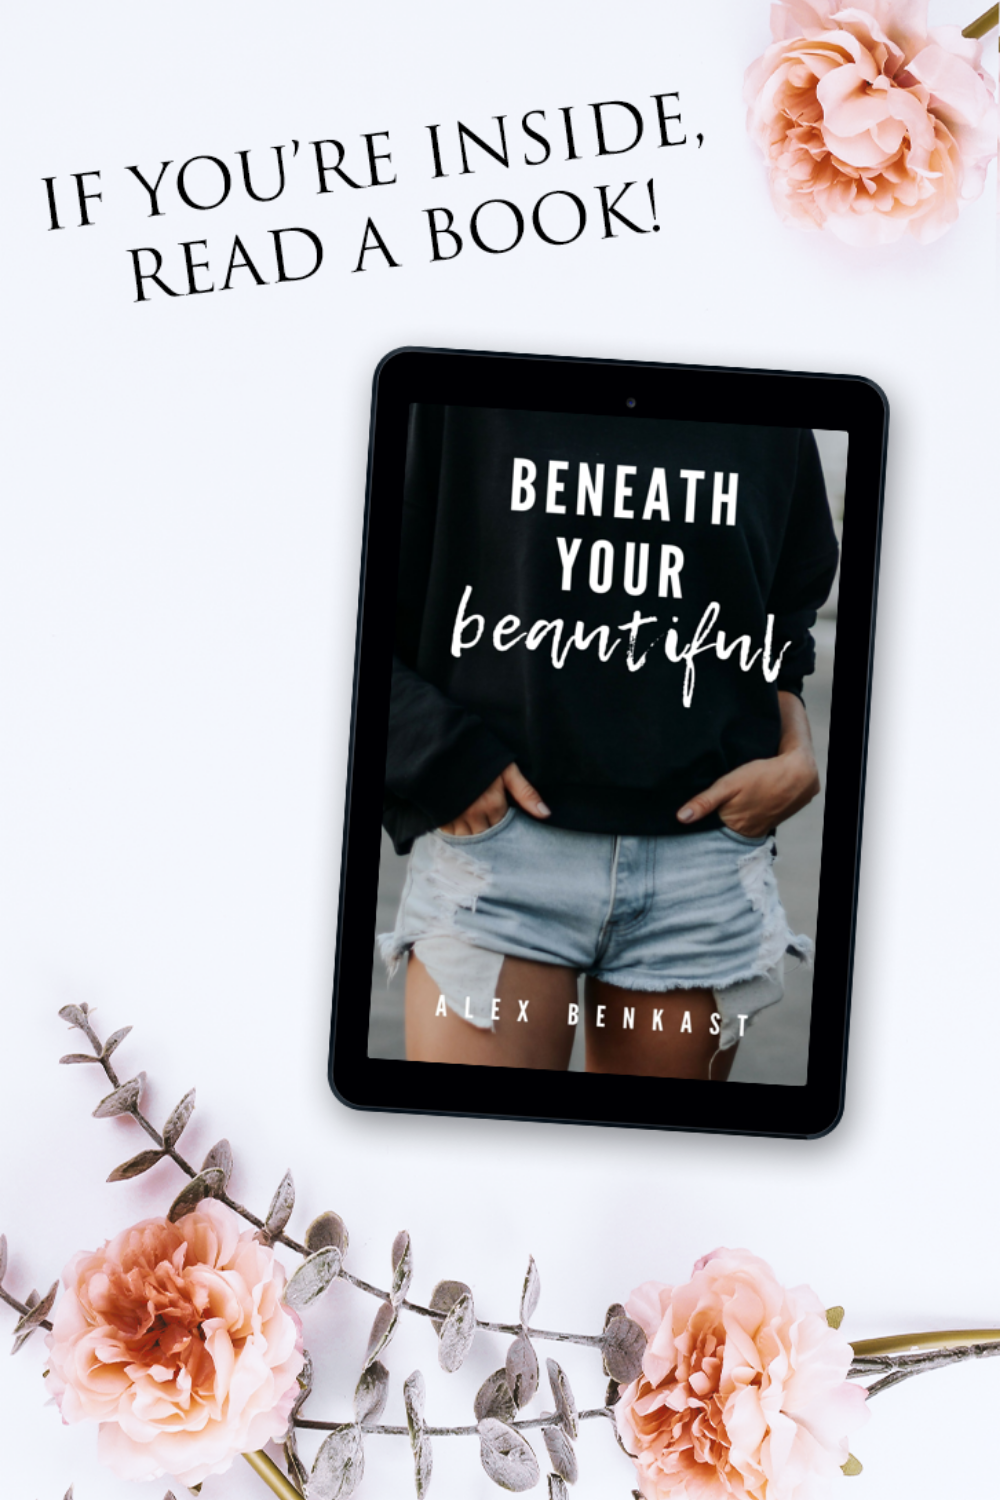 Beneath Your Beautiful by Alex Benkast Promo Pins